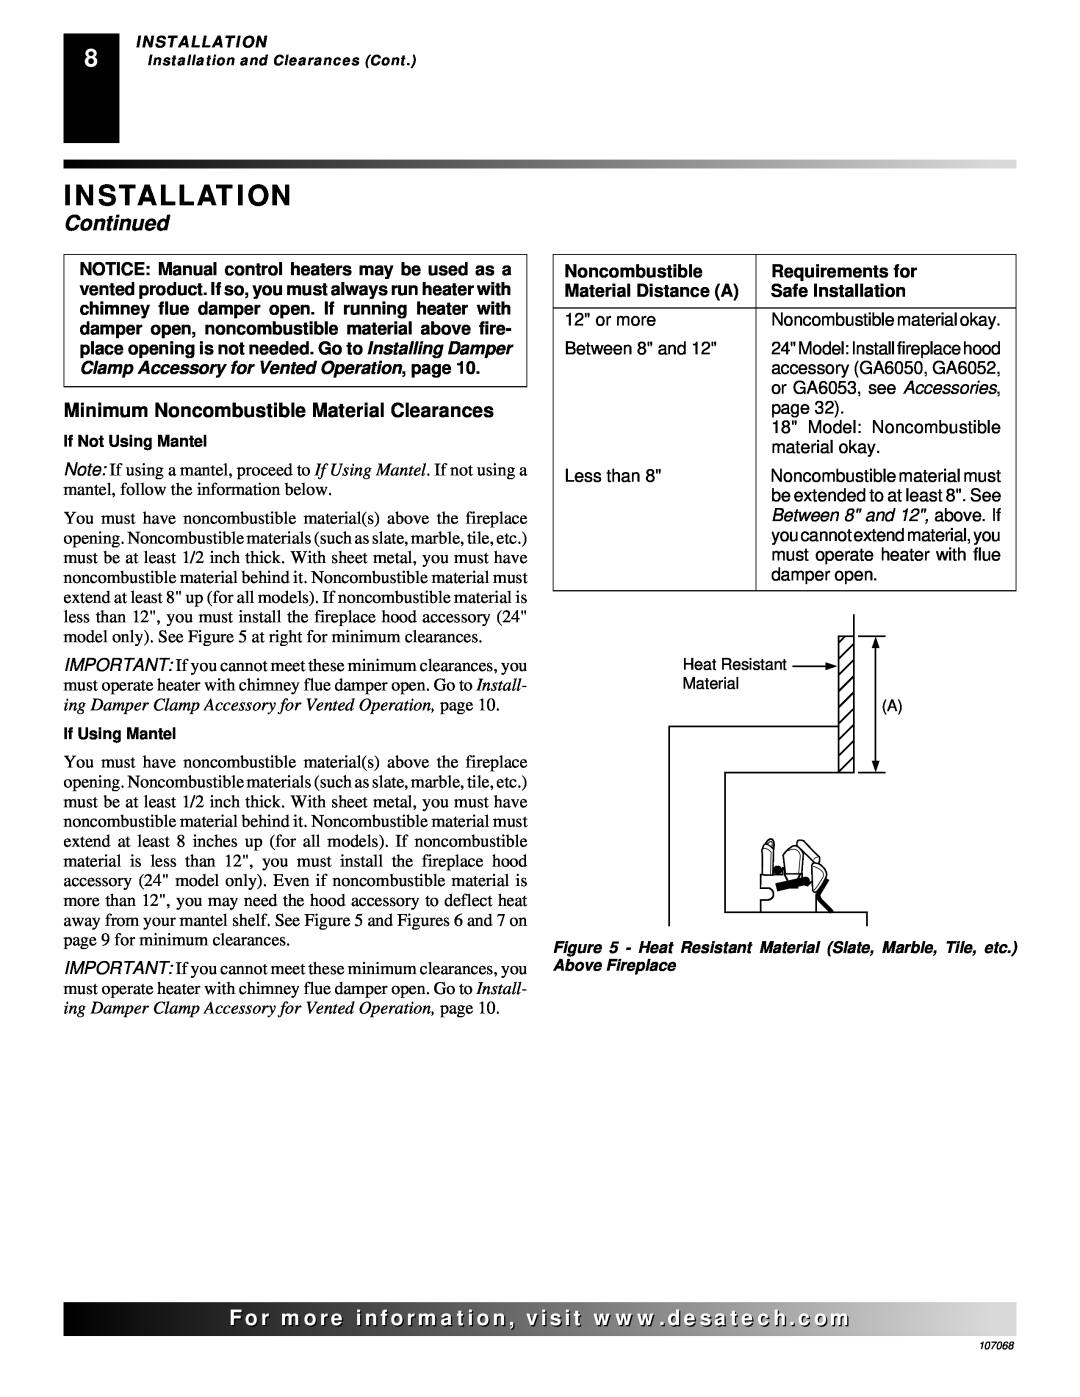 Desa CGS3124N Installation, Continued, Minimum Noncombustible Material Clearances, Requirements for, Material Distance A 